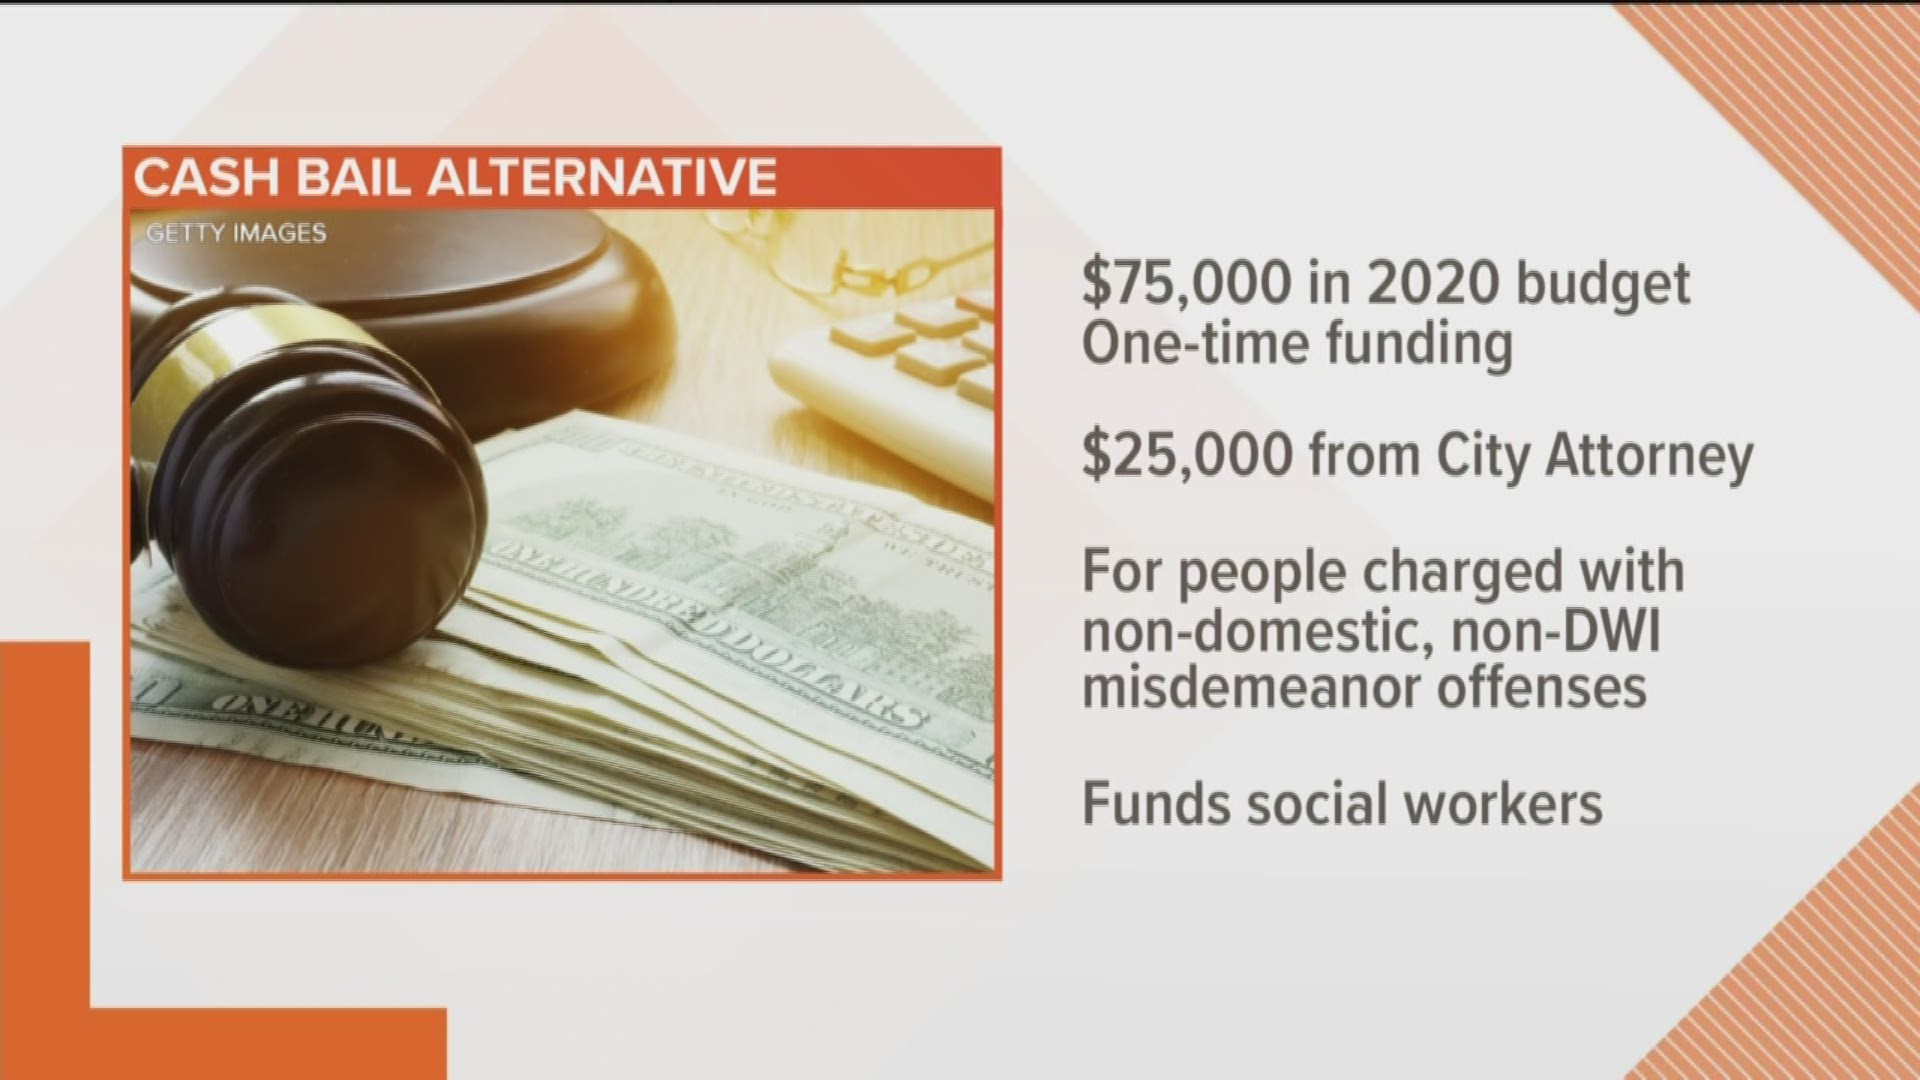 Minneapolis Mayor Jacob Frey is proposing a new alternative to cash bail in the 2020 city budget. https://kare11.tv/2kSUmUX